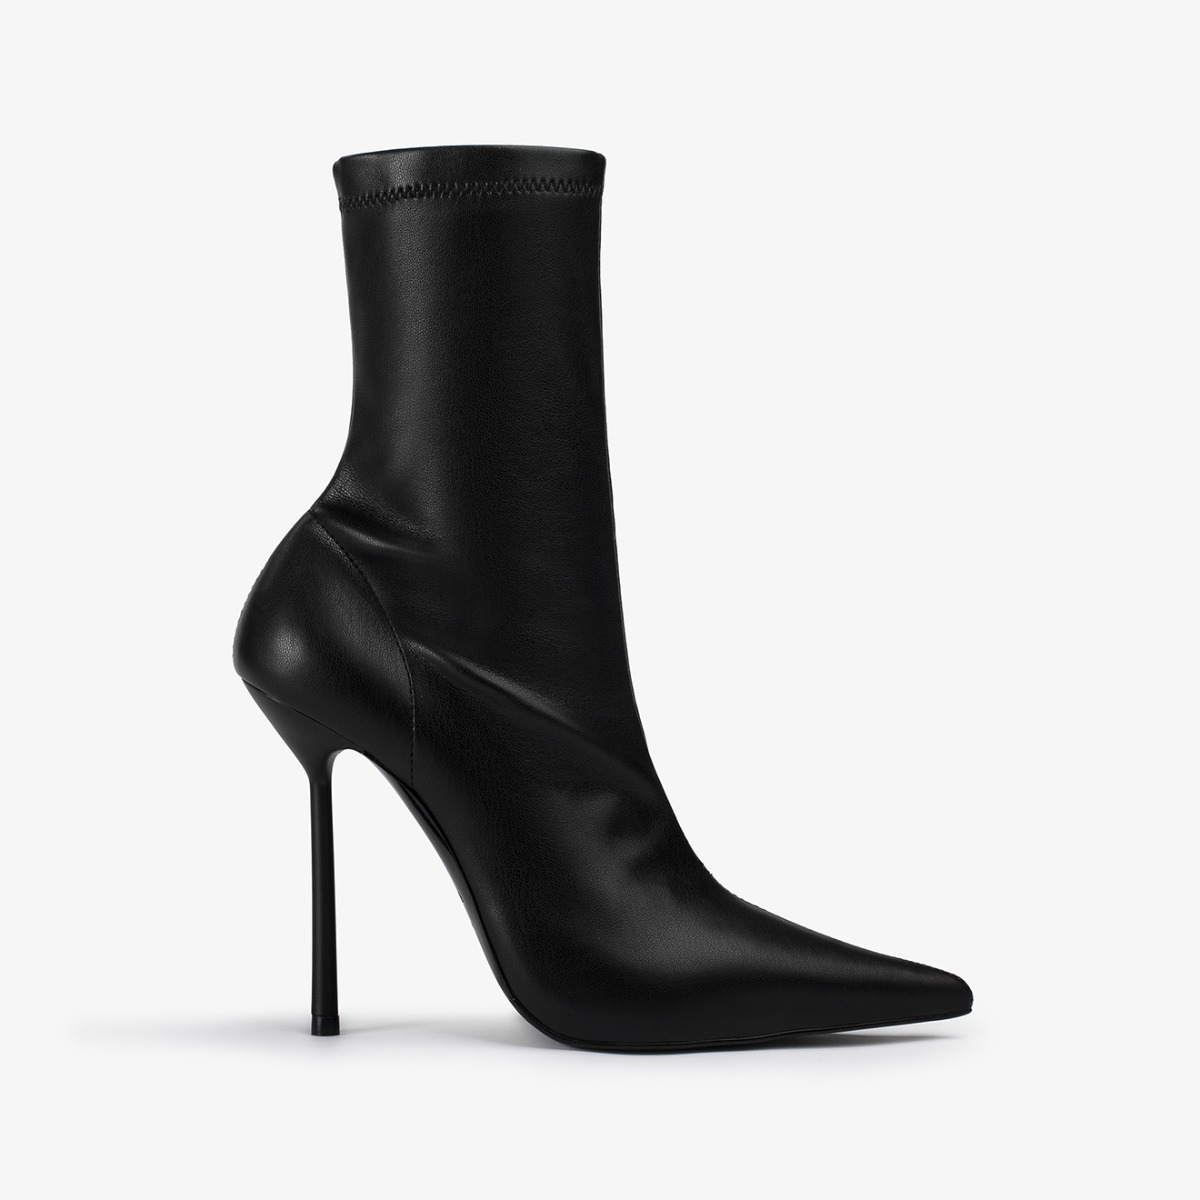 BELLA ANKLE BOOT 120 mm - Le Silla | Official Online Store